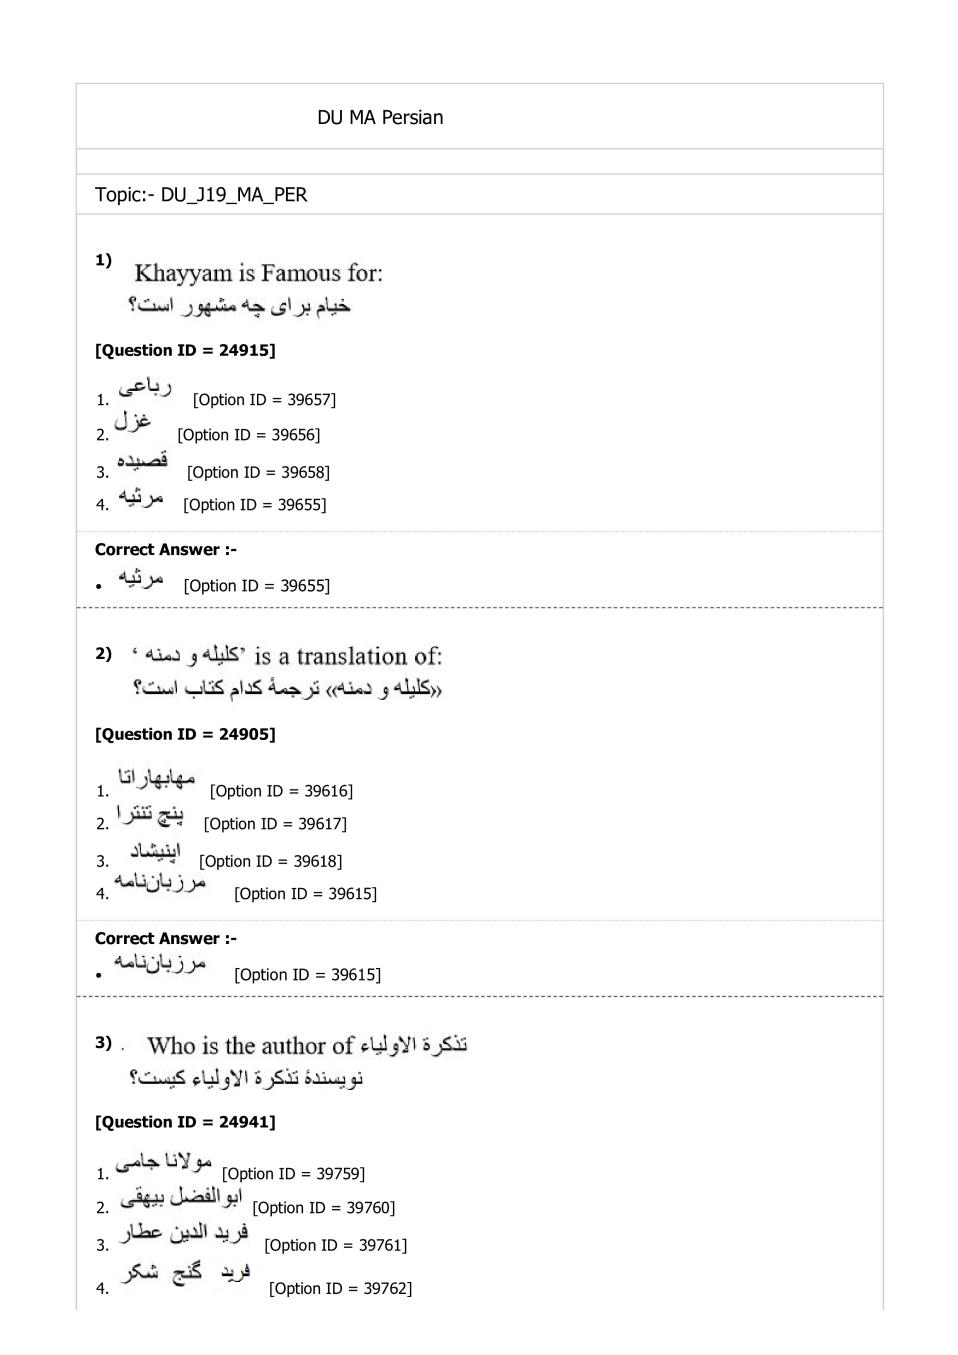 DUET Question Paper 2019 for MA Persian - Page 1